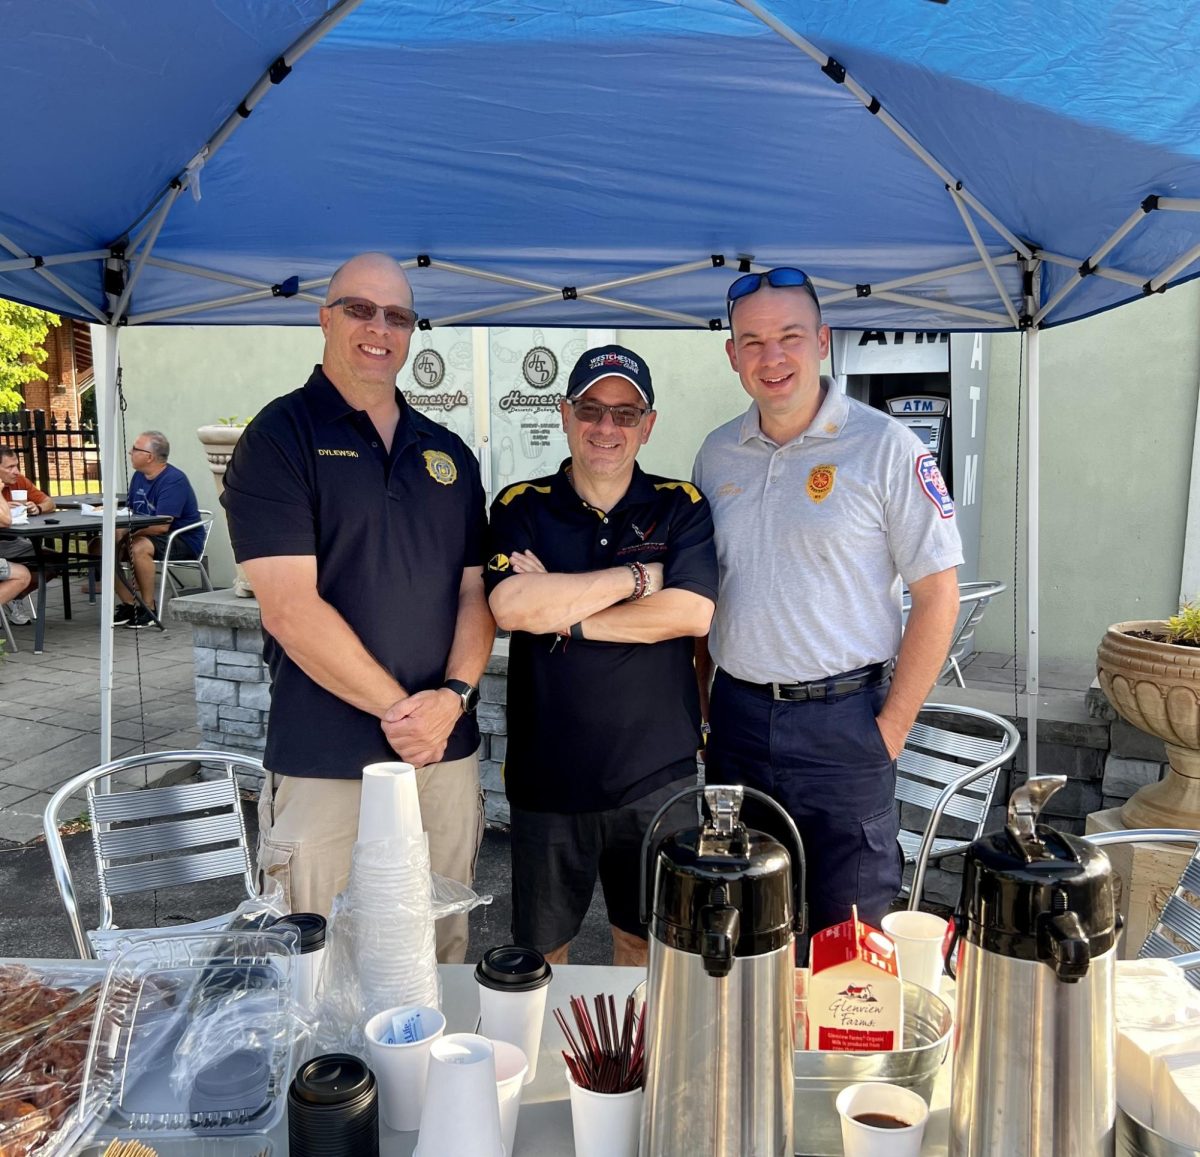 Chief of Peekskill Police Leo Dylewski, left, and Peekskill Fire Chief James Seymour, right, with Basil Kazepis, founder of Westchester Cars and Coffee at last years Coffee with the Chiefs